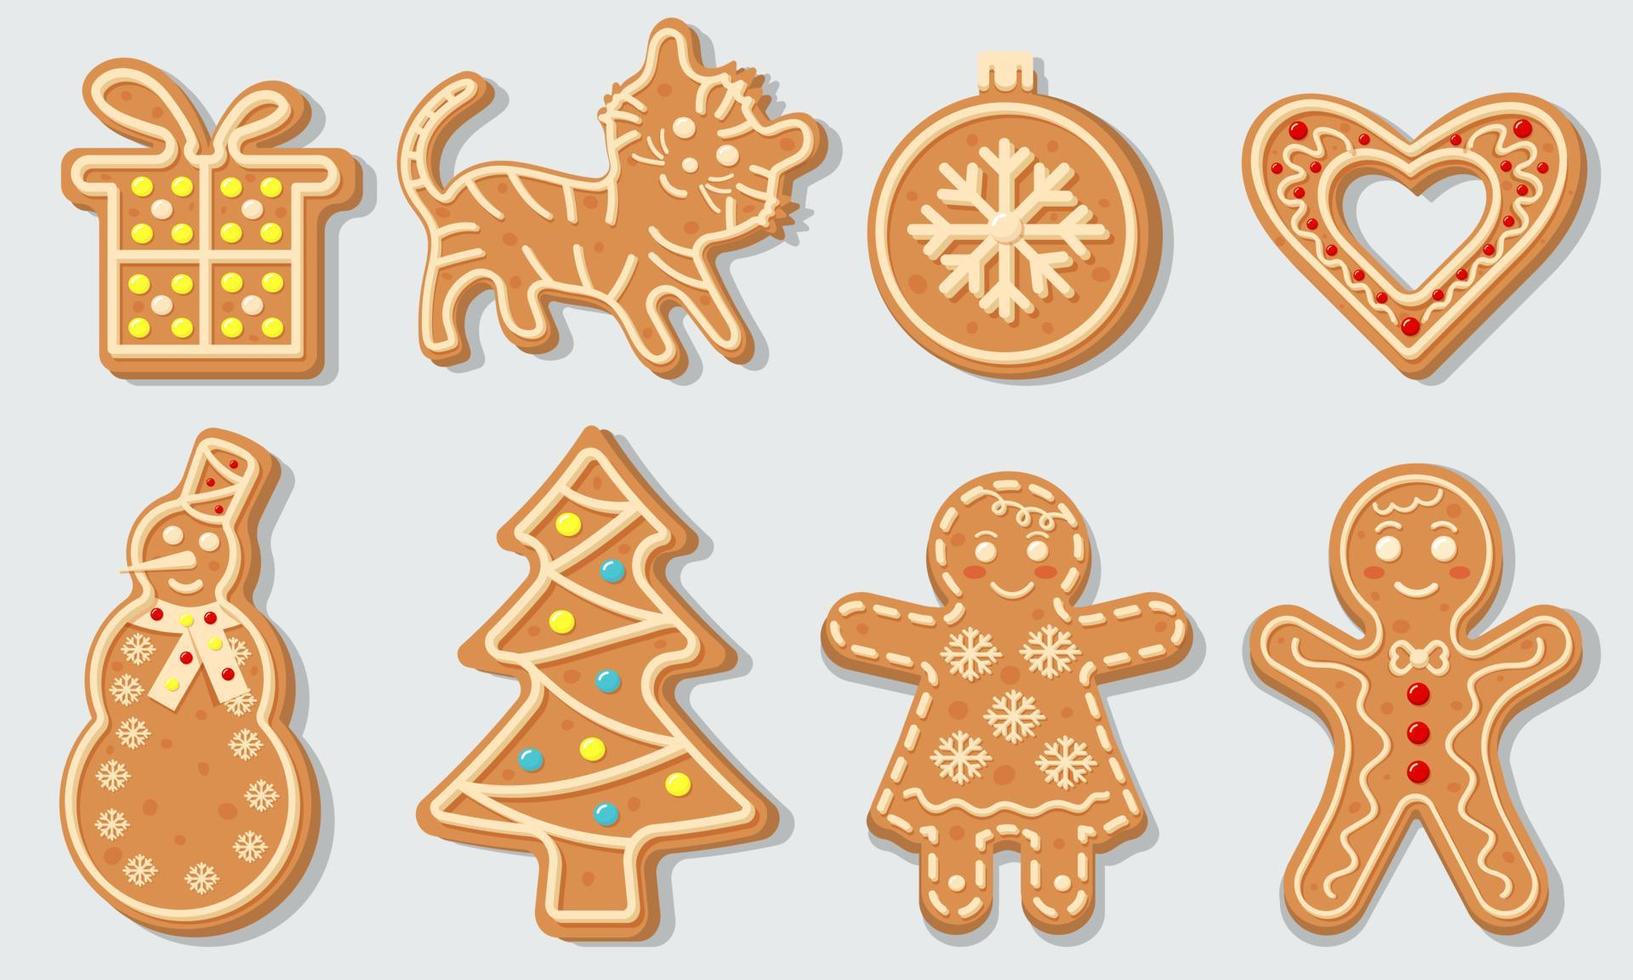 Christmas gingerbread cookies in the shape of Christmas ball, Christmas tree, tiger, heart, snowman, gift and gingerbread men. vector